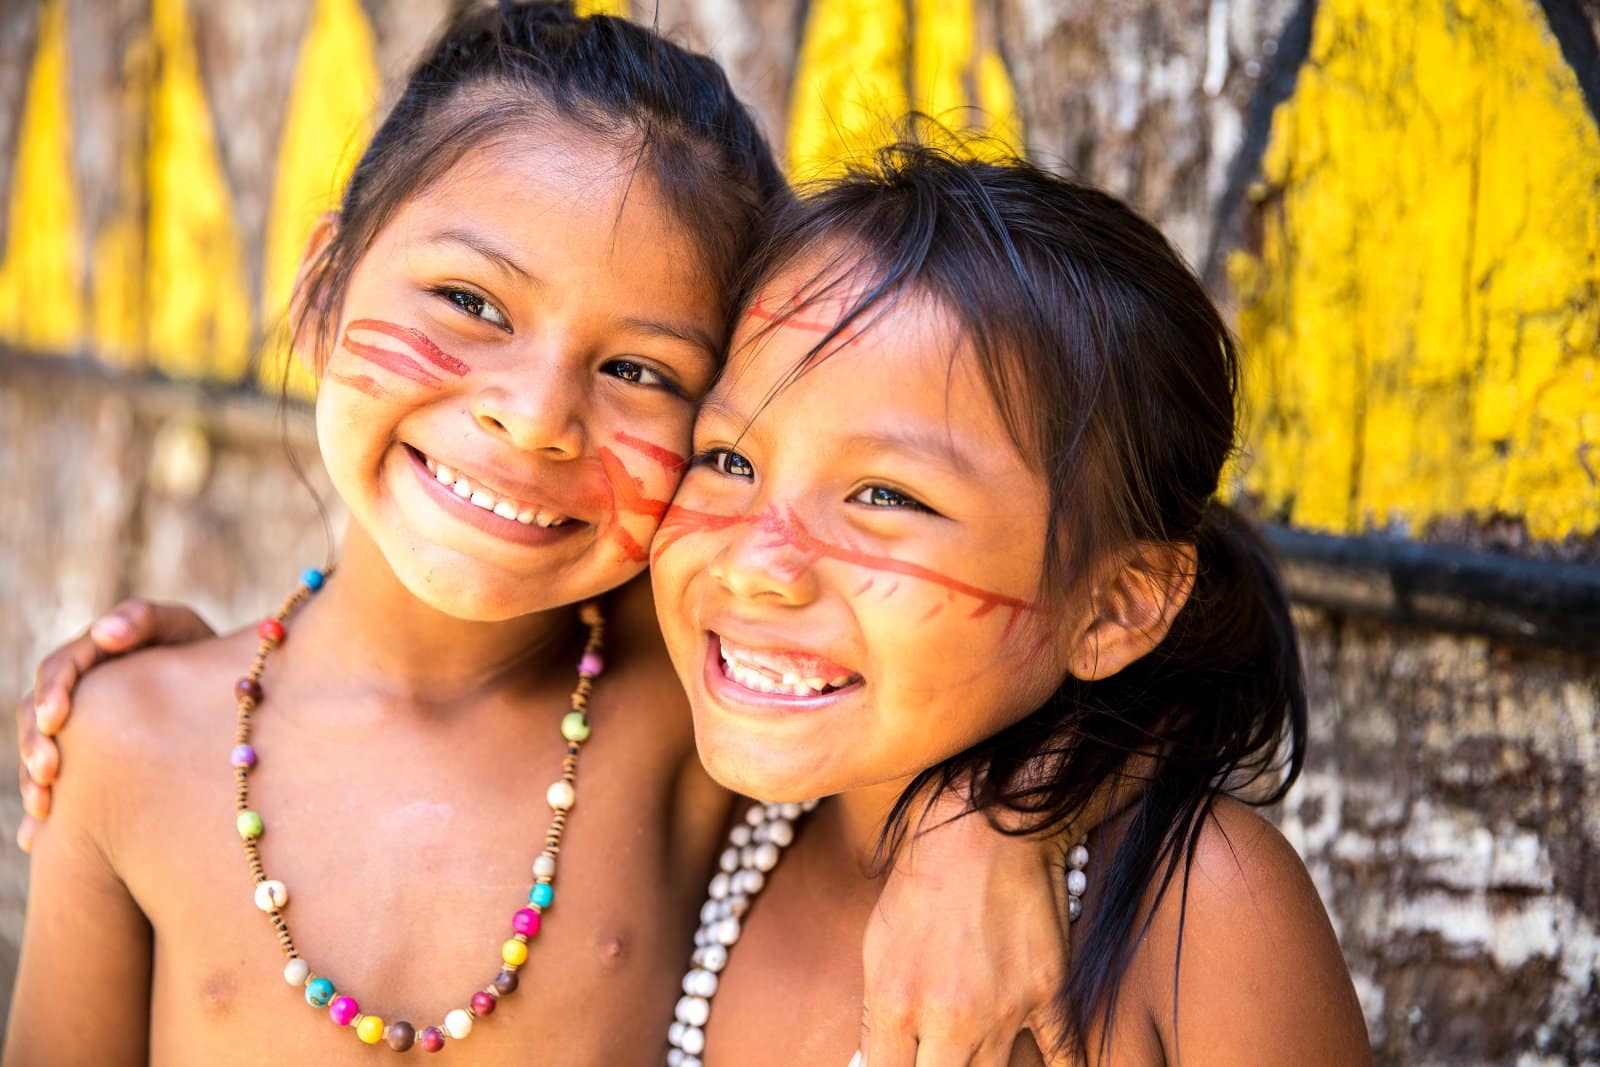 <p class="wp-caption-text">Image Credit: Shutterstock / ESB Professional</p>  <p><span>Engaging ethically with indigenous cultures involves more than just participating in ceremonies; it requires an understanding and respect for their traditions, values, and rights. Visitors should seek experiences that offer mutual respect and benefit, ensuring their presence supports the community and preserves its traditions. Ethical engagement also means prioritizing the guidance of indigenous leaders and healers willing to share their knowledge and practices.</span></p>